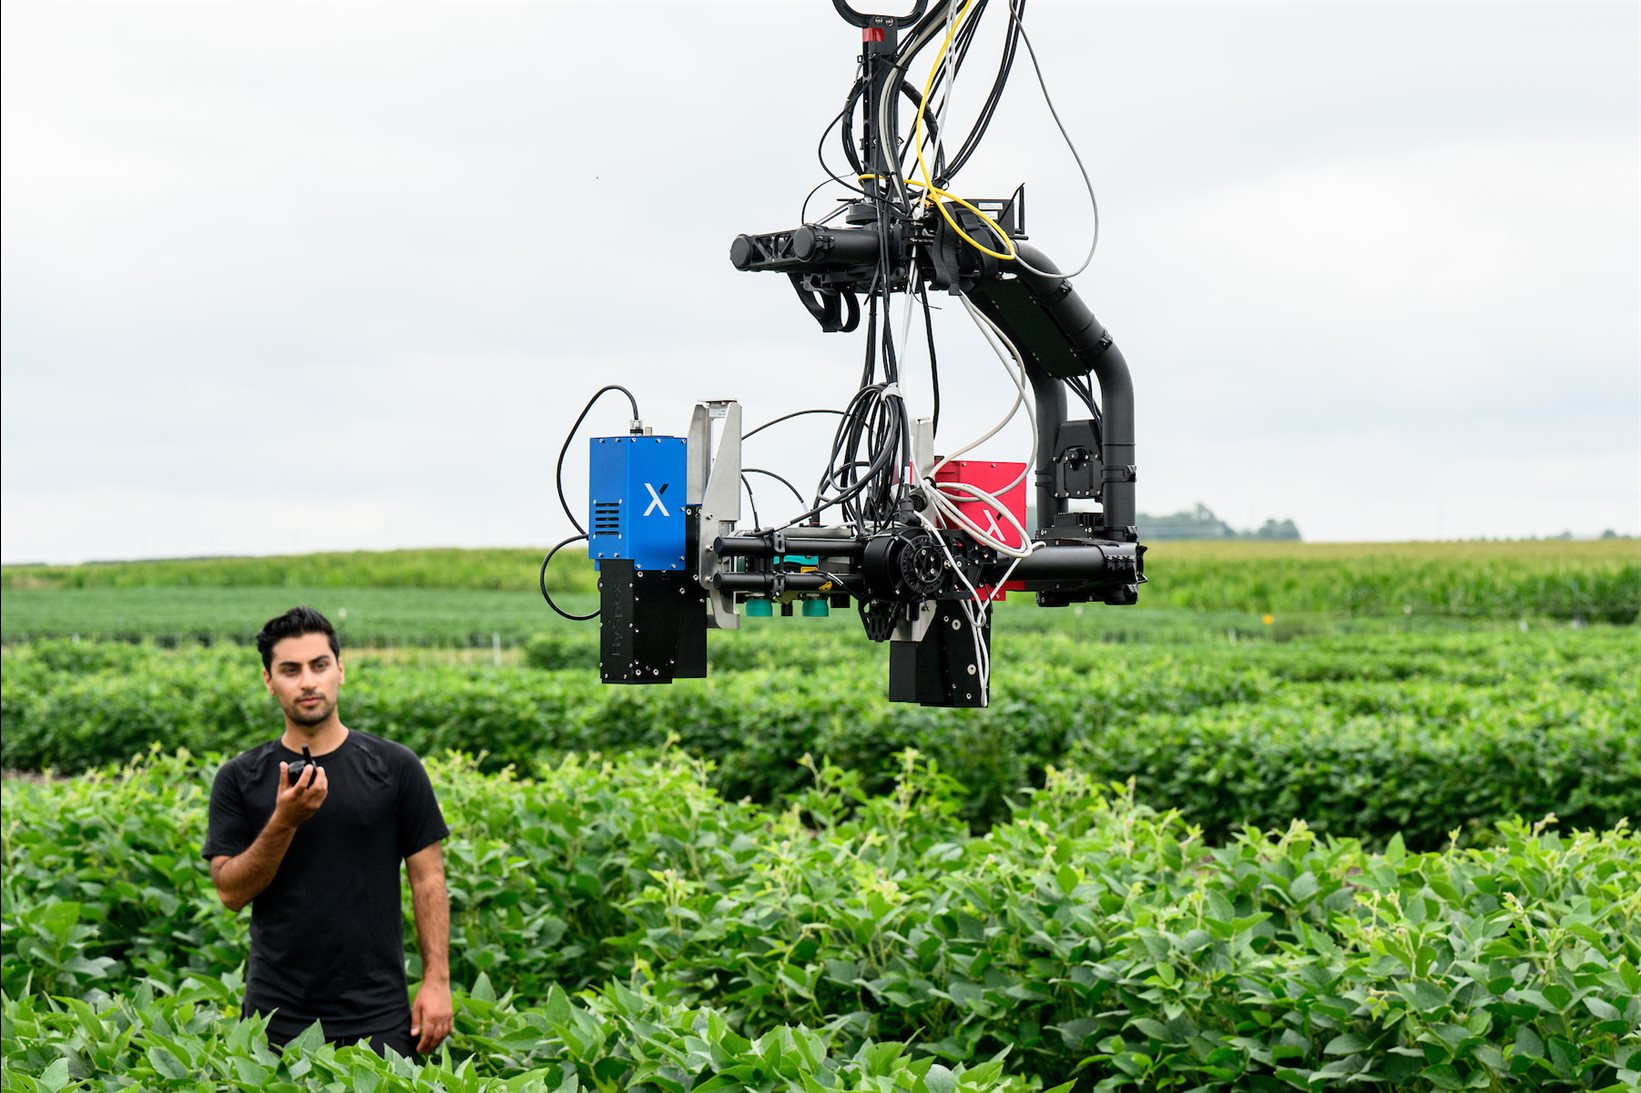 The Spidercam system at the Energy Farm at the University of Illinois Urbana-Champaign hovers above a field of crops.